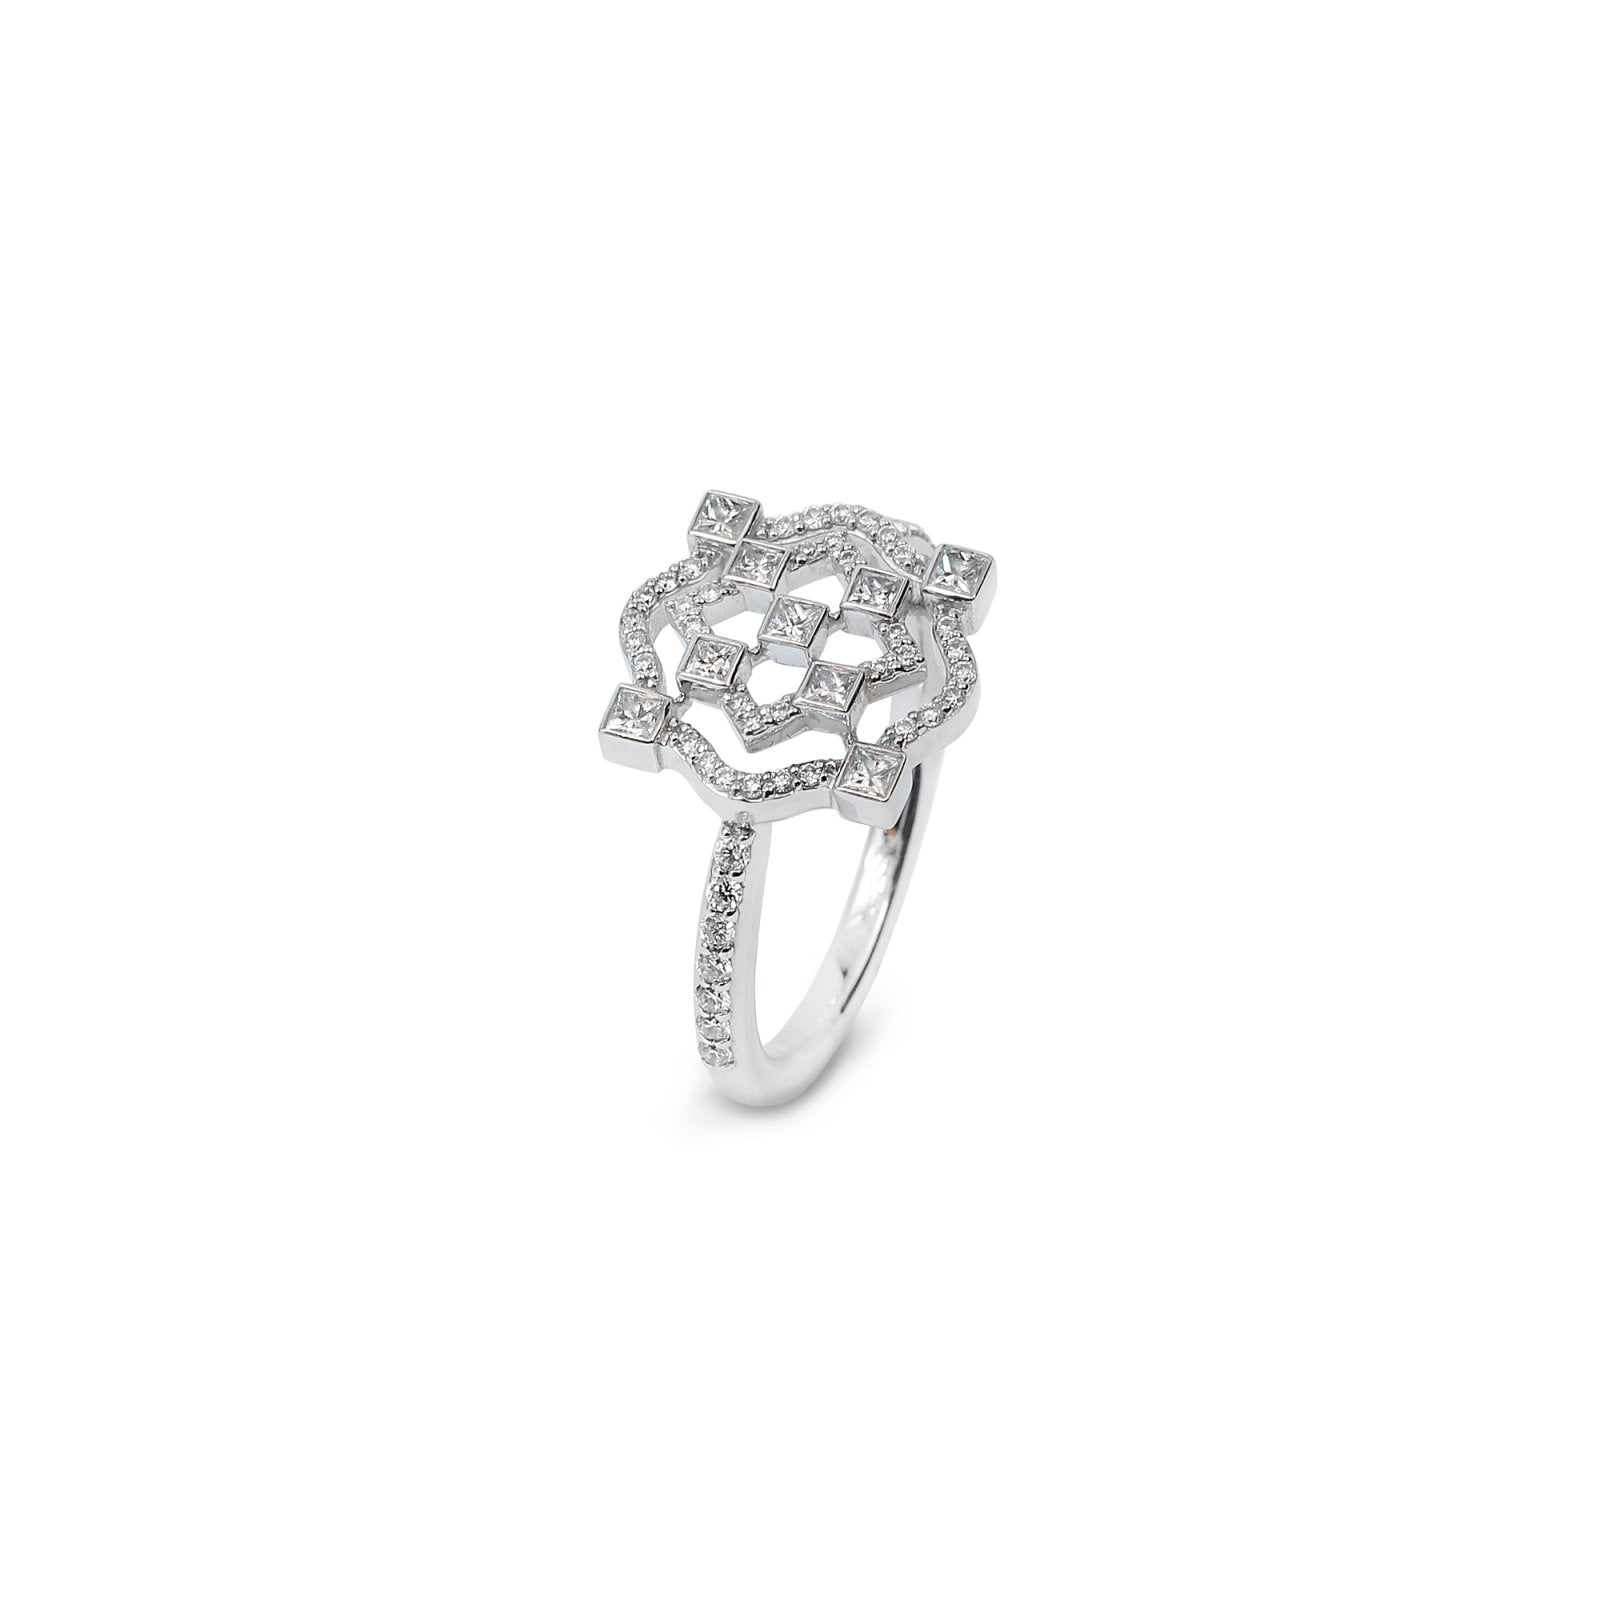 White Gold Ring  Flower style with all diamonds on setting 14 Round diamonds on the shanks and 36 Round diamonds on the top plus 9 Princes cut diamonds TDW: 0.86  VS EF color 18k  4.46gr